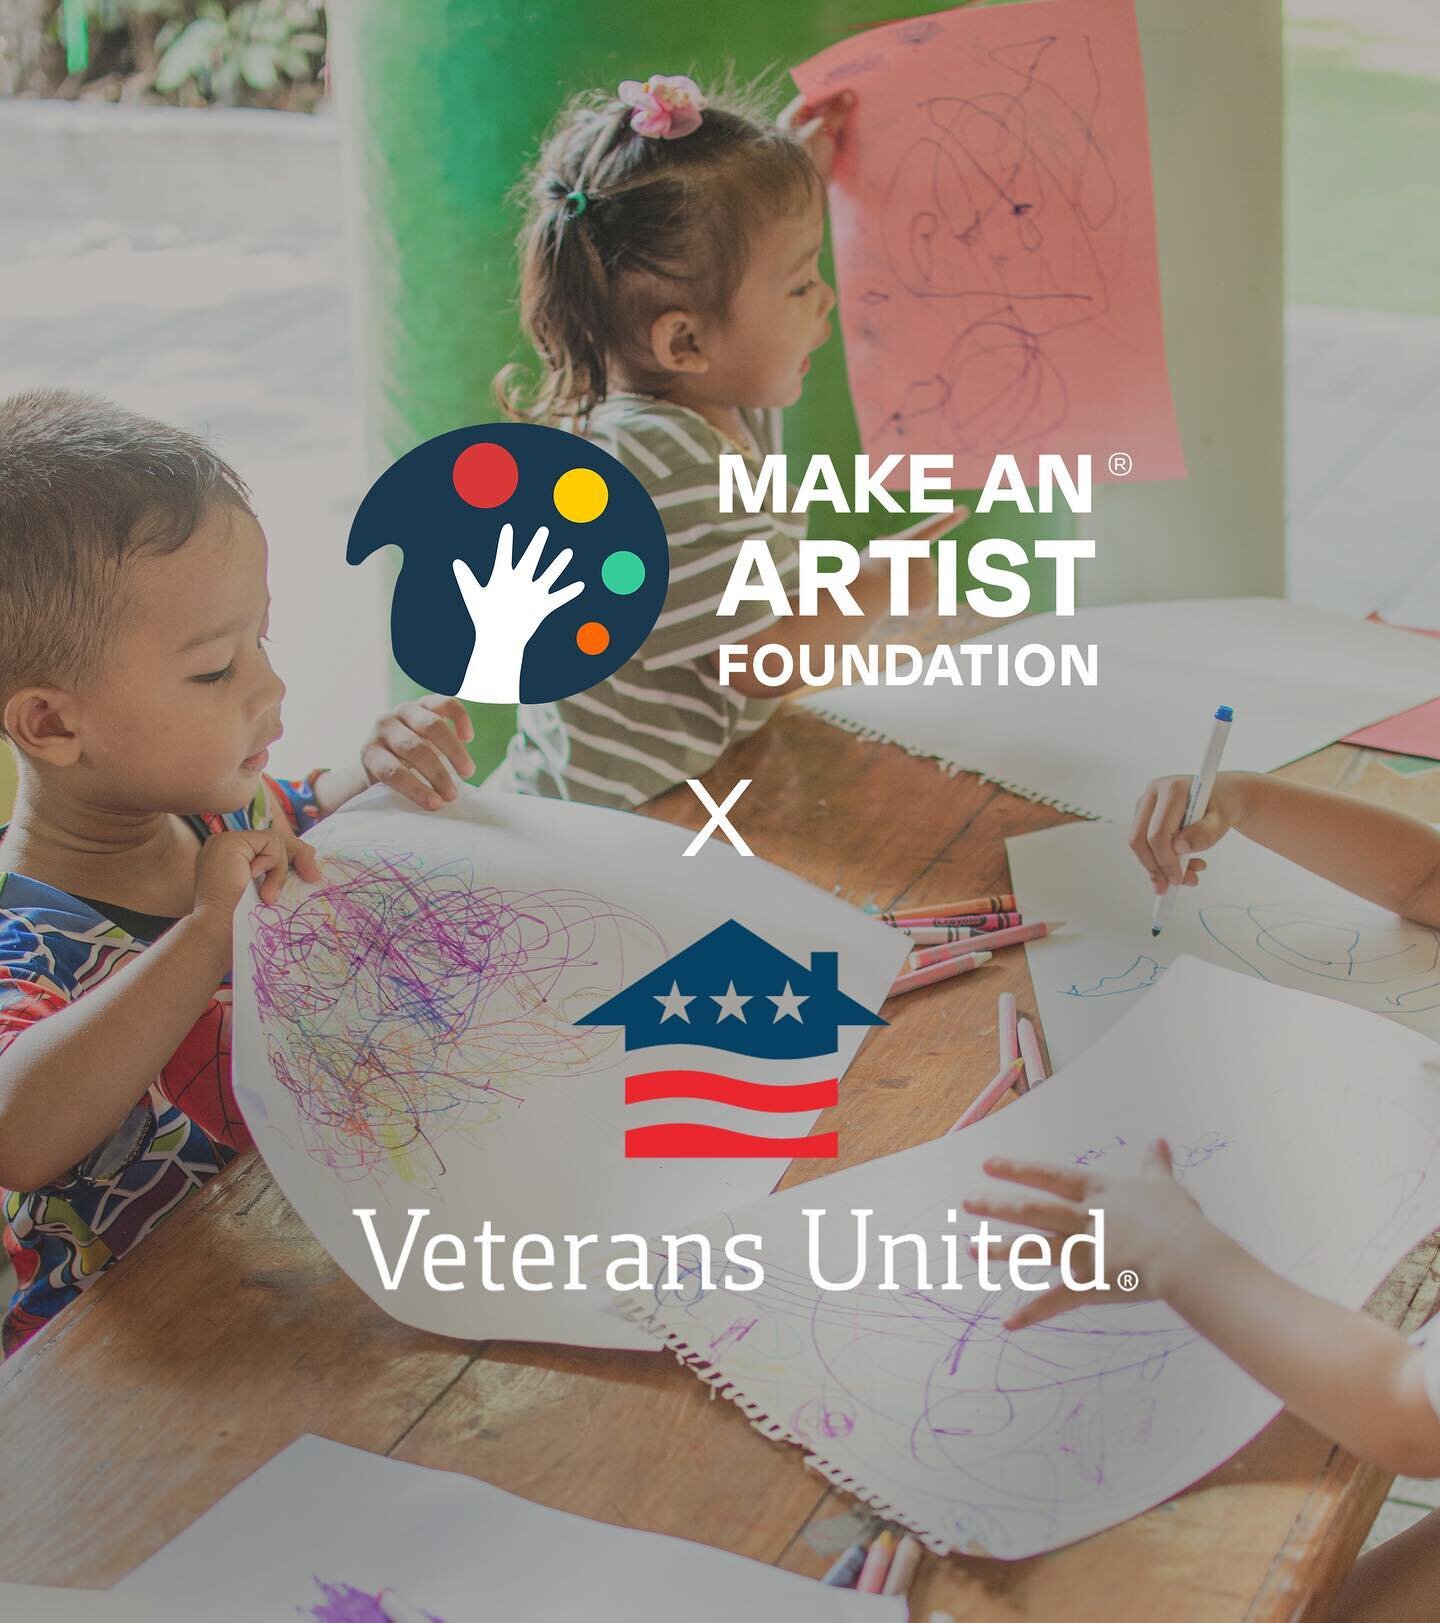 A tremendous thank you to Veterans United for donating $2000 to Make an Artist Foundation. With your support, we were able to enhance art programs for 3000+ children this summer! 

Arts education fosters bright, creative, and socially engaged childre